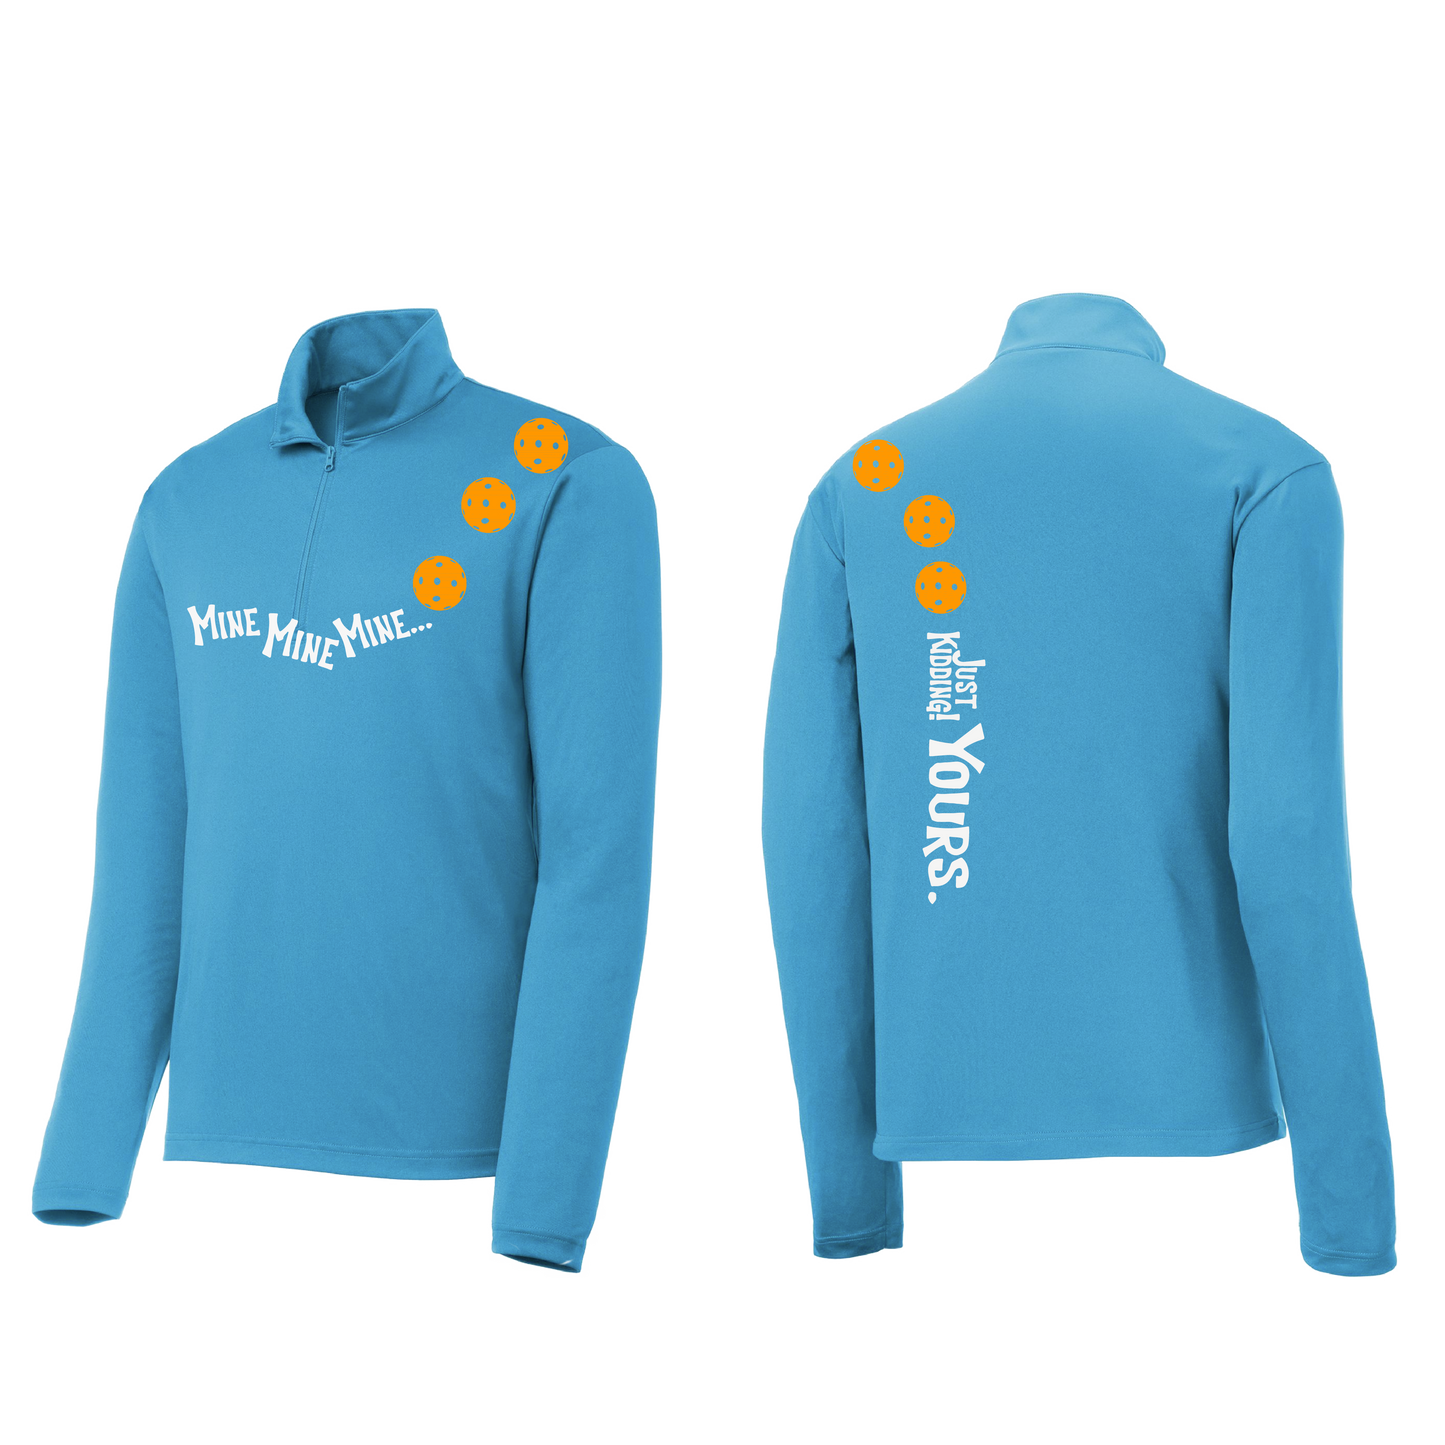 Mine JK Yours (Pickleball Colors Orange Yellow or Red) | Men's 1/4 Zip Long Sleeve Pullover Athletic Shirt | 100% Polyester